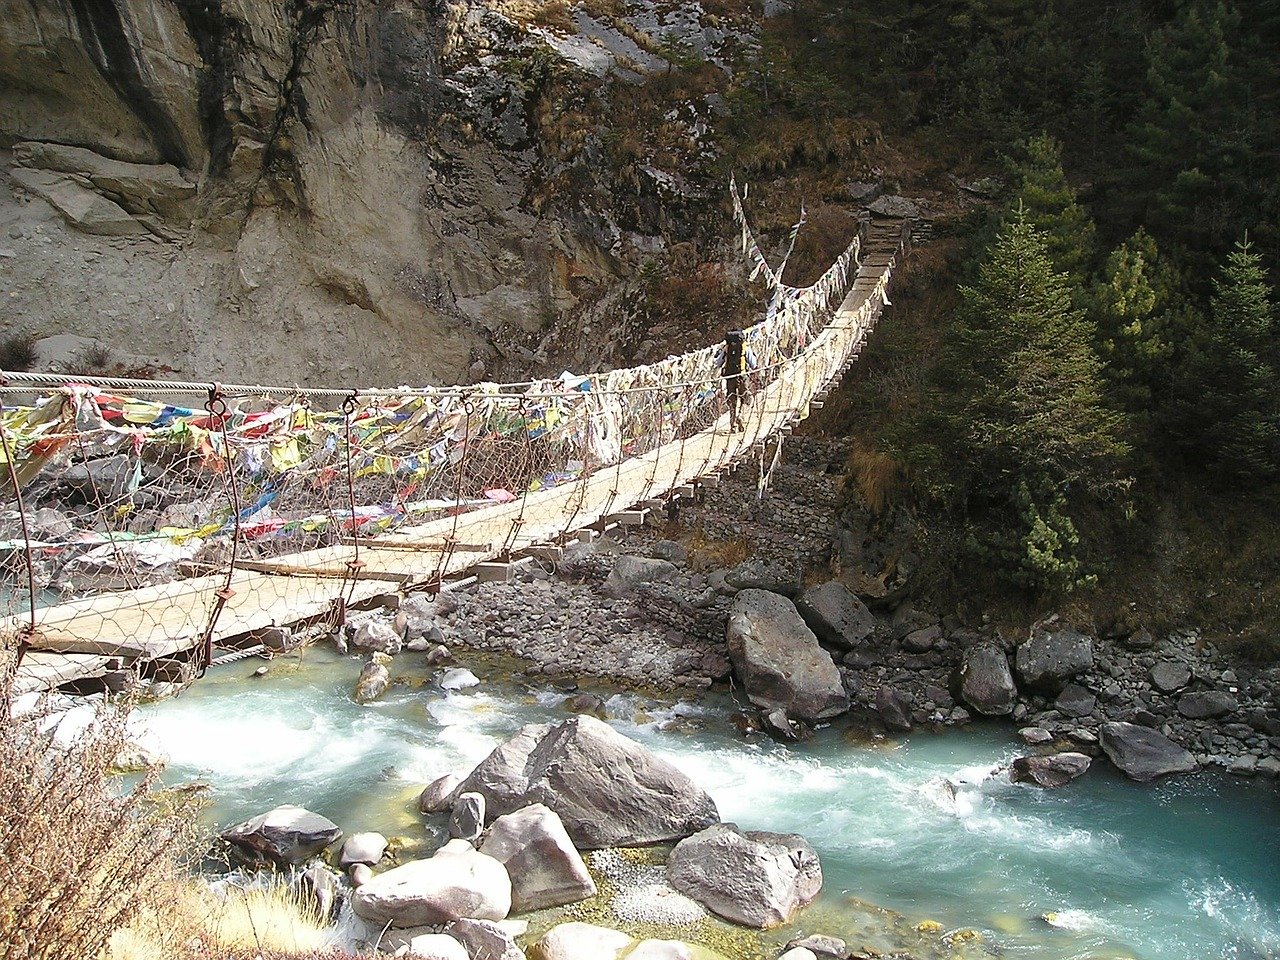 Adventure activities you can do in Nepal